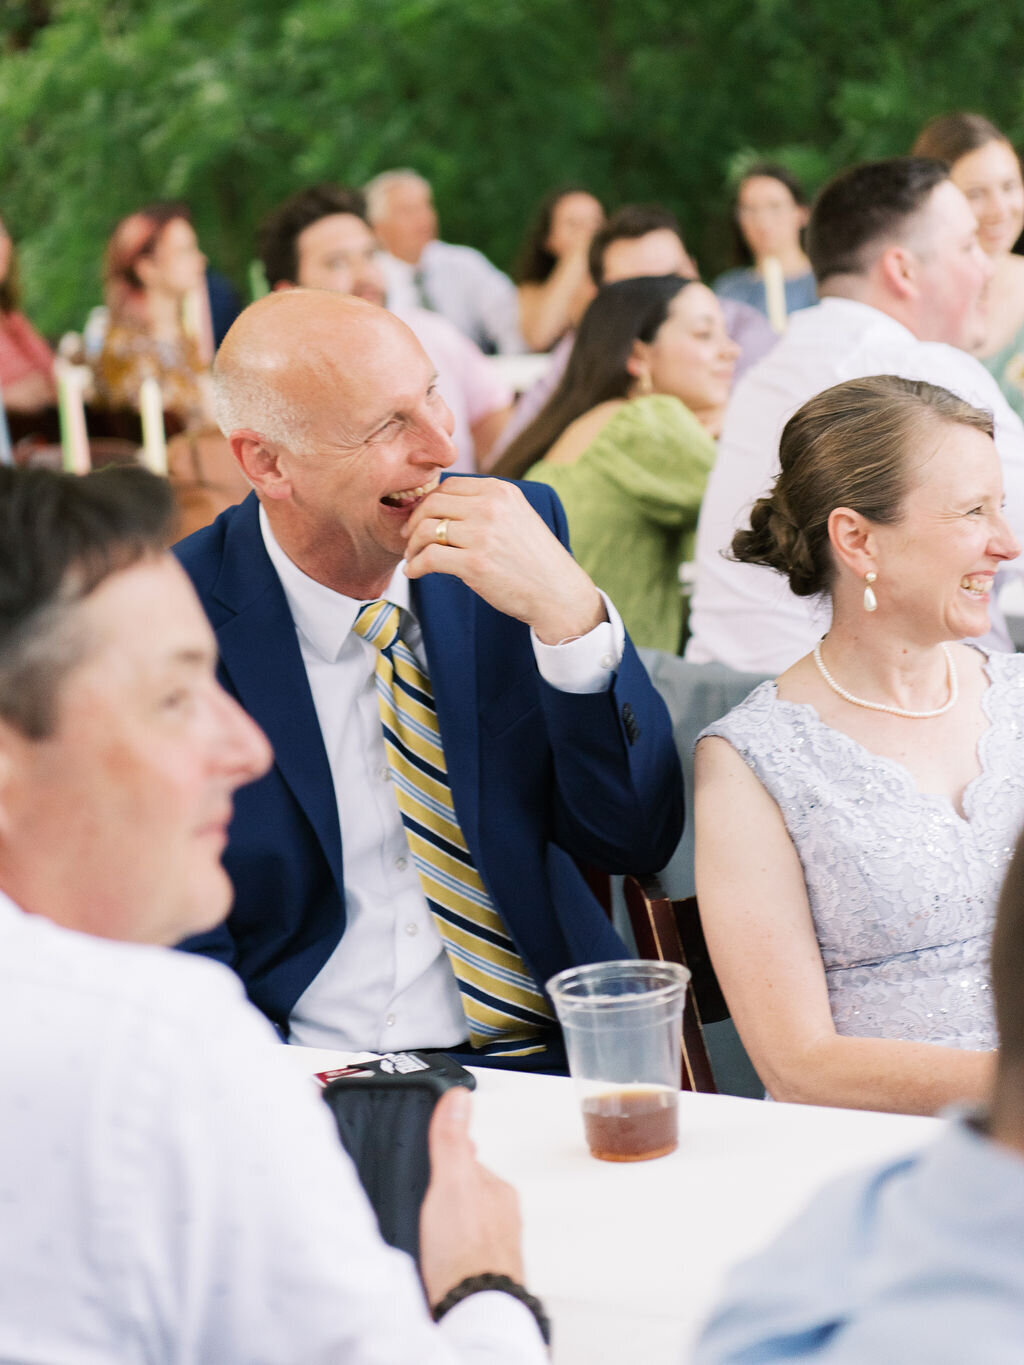 Parents of the groom laugh during toasts at a wedding reception